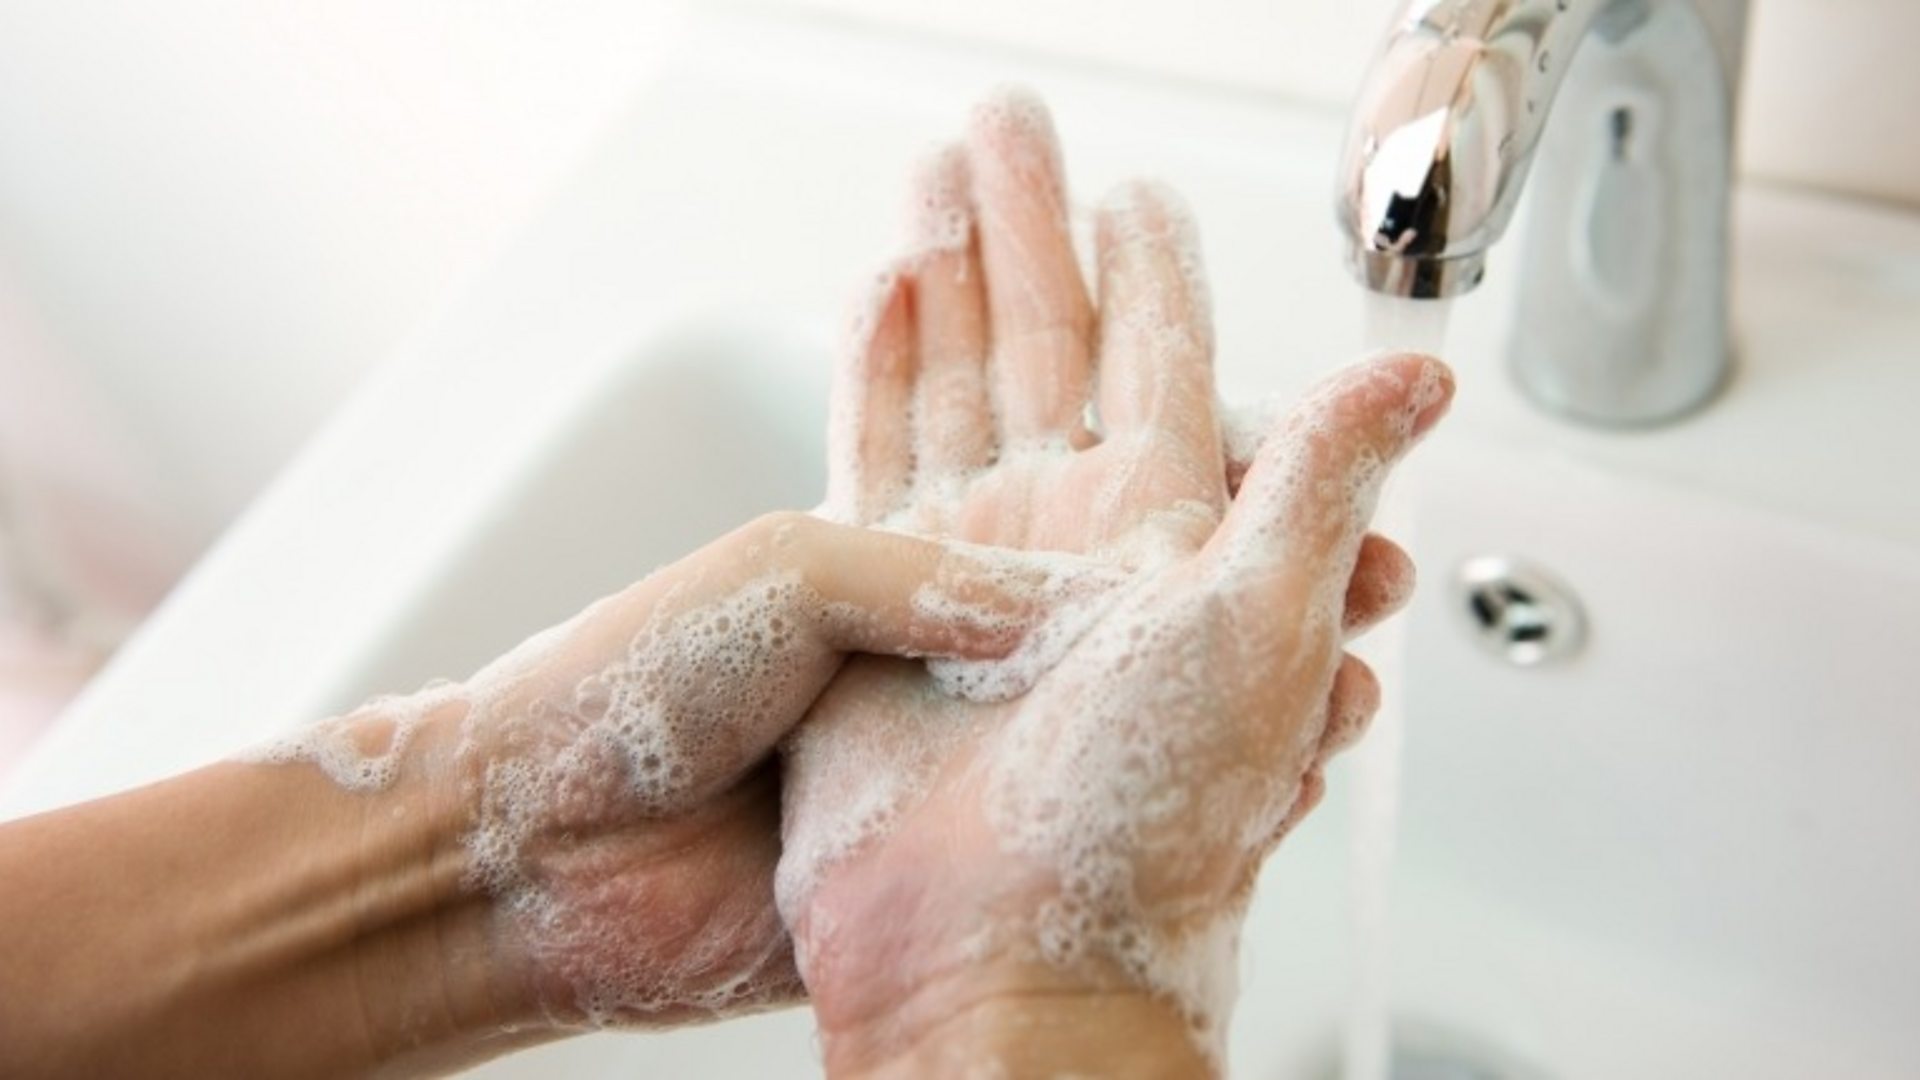 Coronavirus: How to wash your hands - in 20 seconds - BBC News